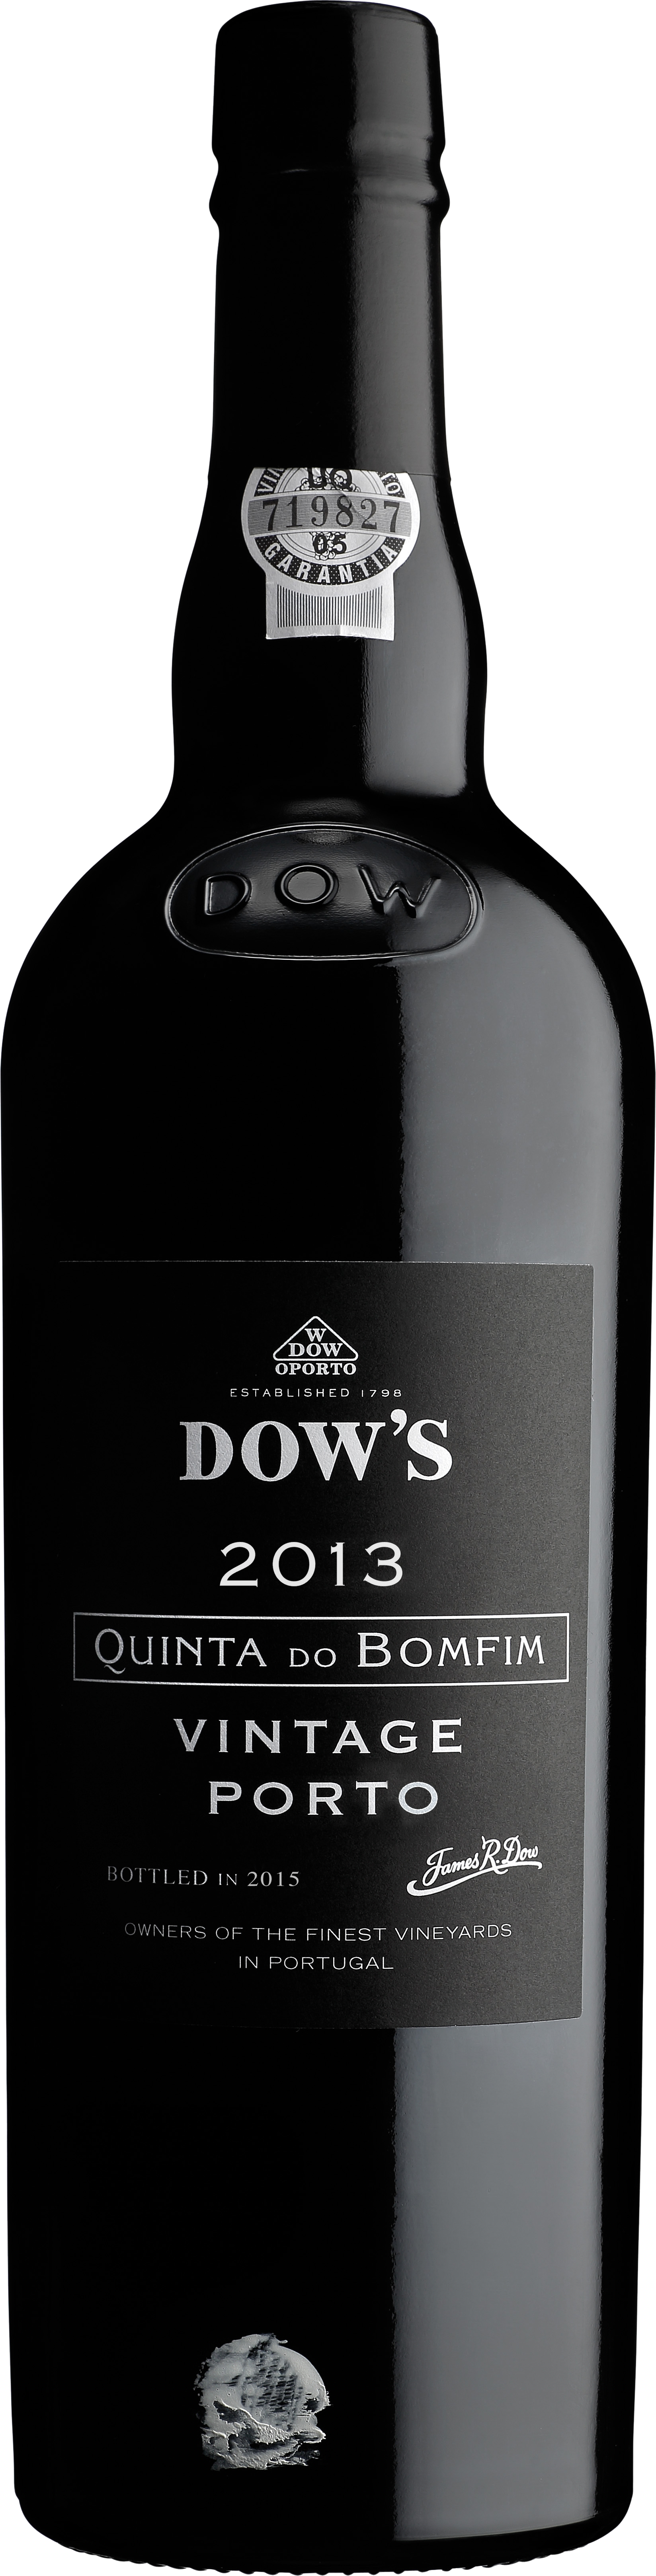 Product Image for DOW'S "QUINTA DO BOMFIM" VINTAGE PORT 2013